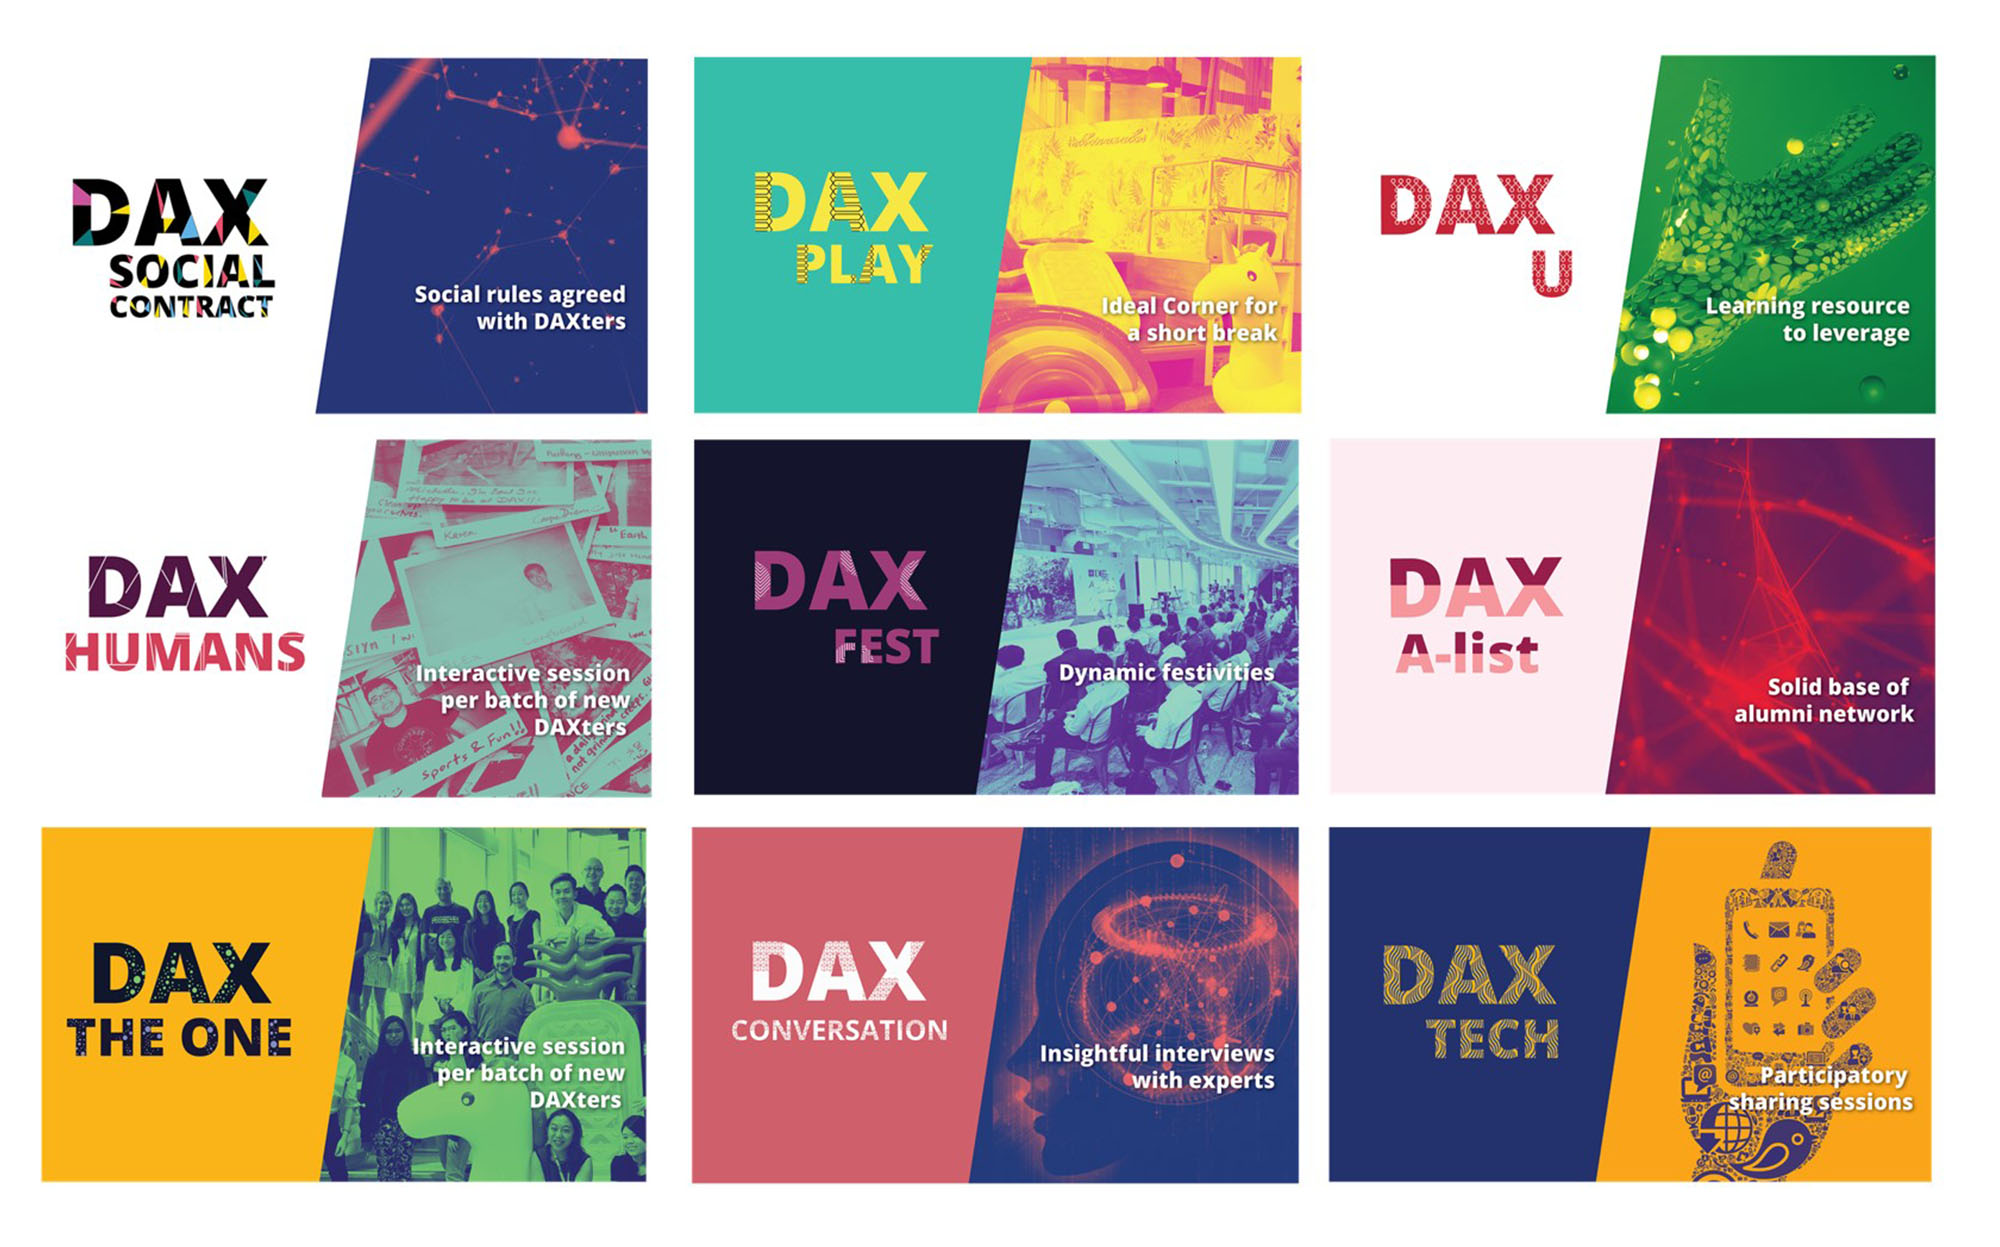 The nine community programmes launched at DAX ReFresh